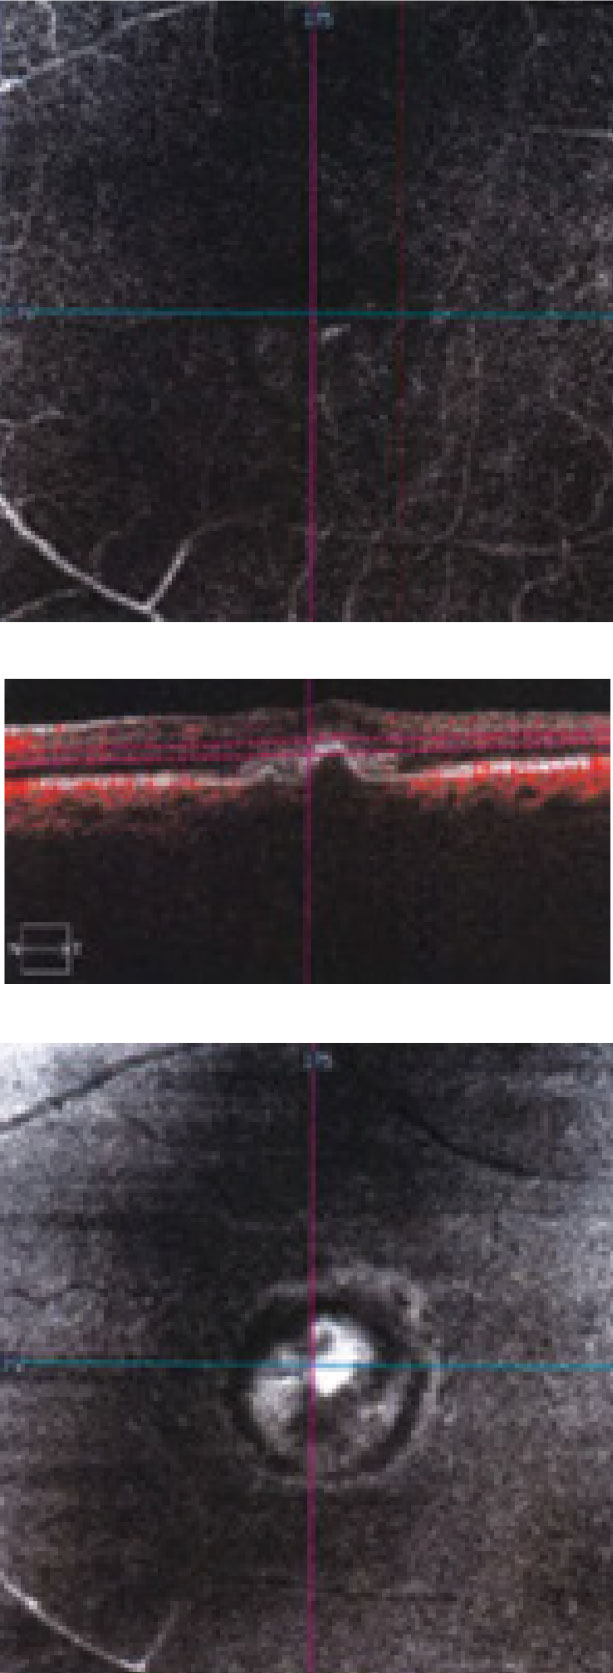 This “deep slice” OCT-A shows an en face view of through the patient’s macula.